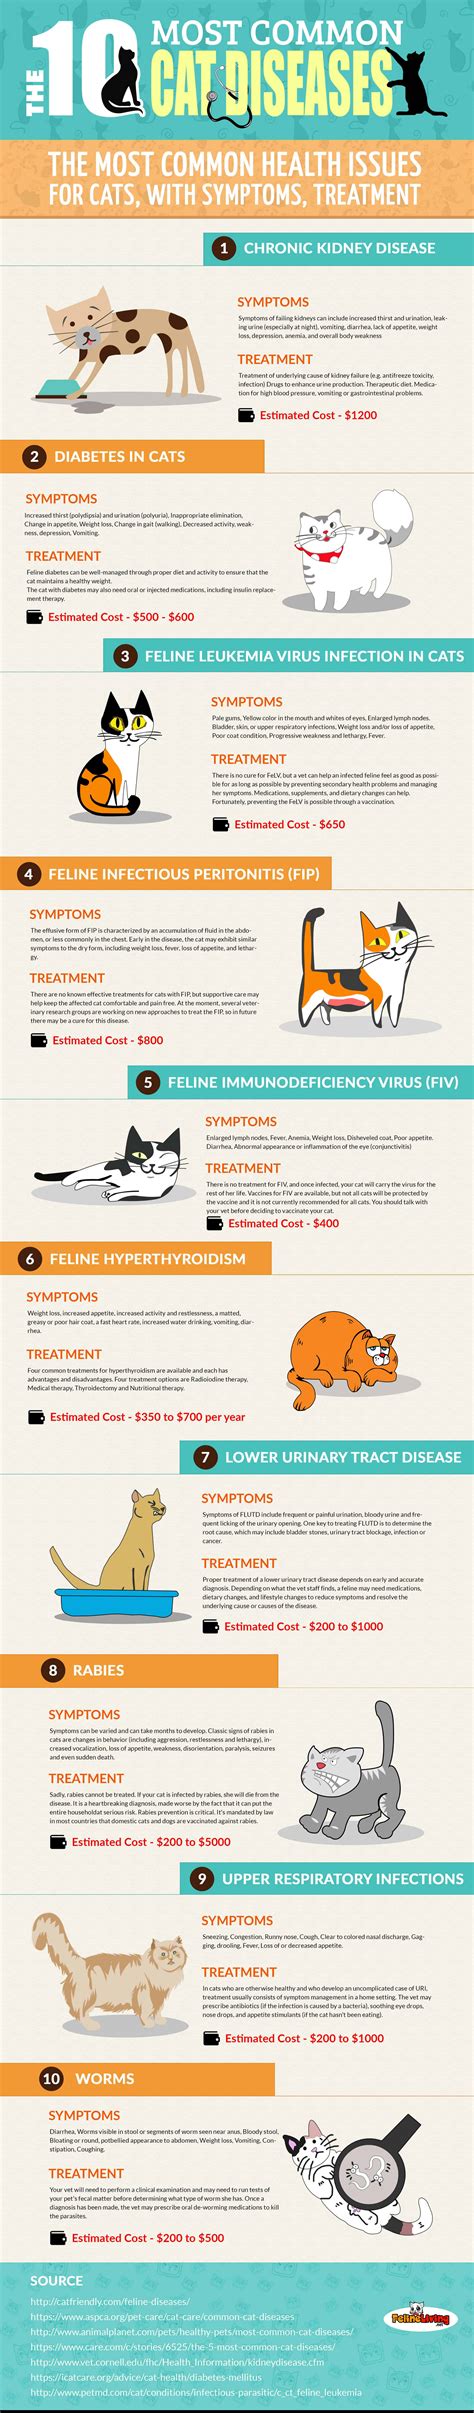  The feline disease shares many similarities with AD and although the diseases are not identical we suggest that the similarities AD and FCD share warrant exploring the feline disease as a model to the human disease